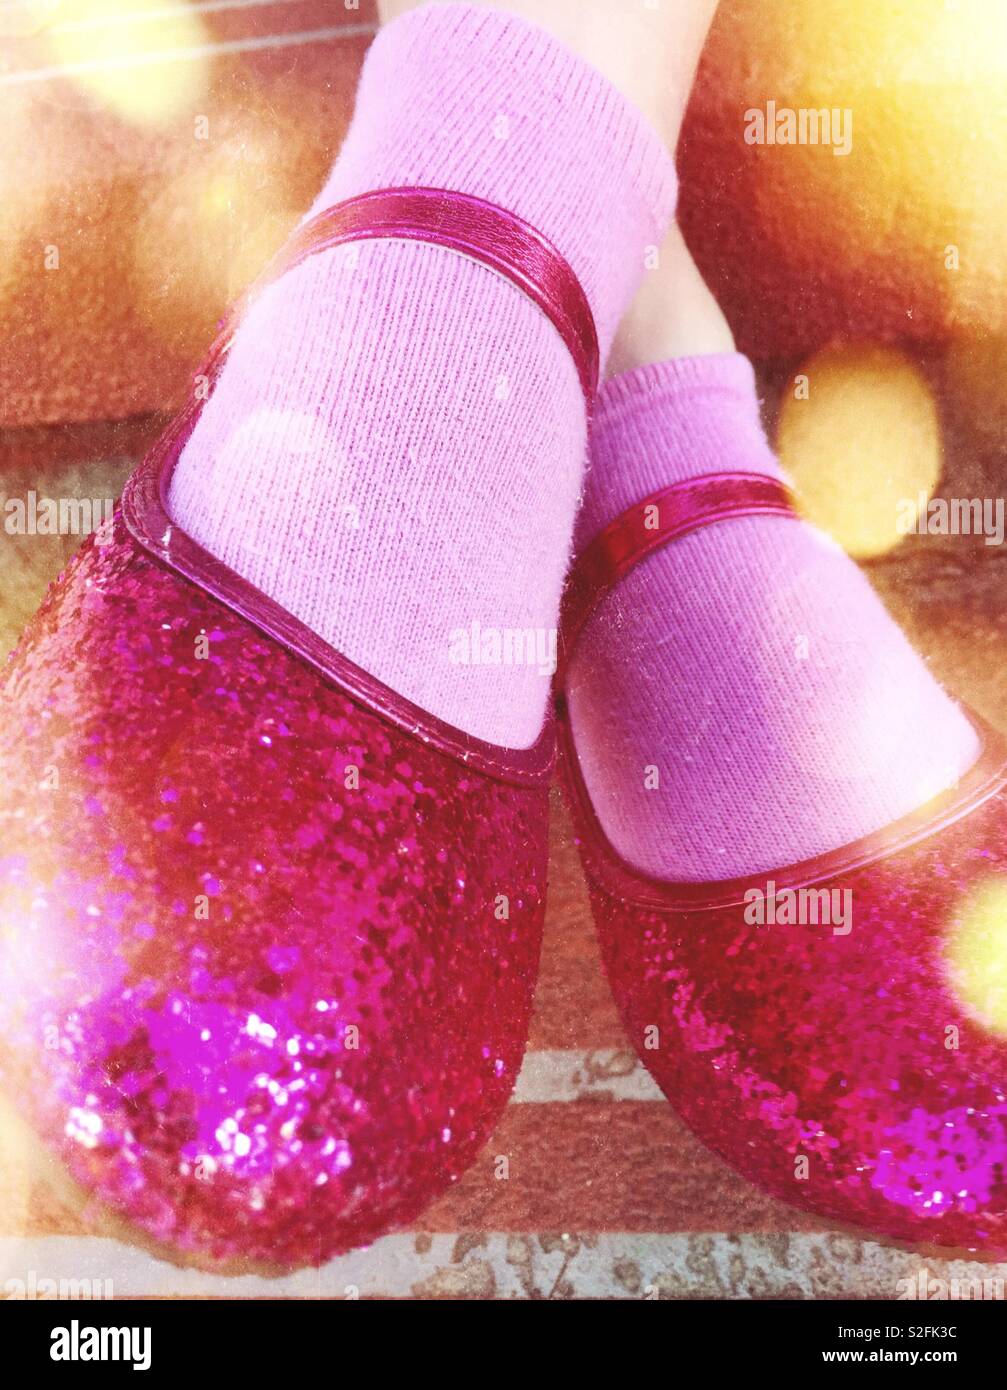 Closeup pink glittery girls dance shoe with pink socks and lens